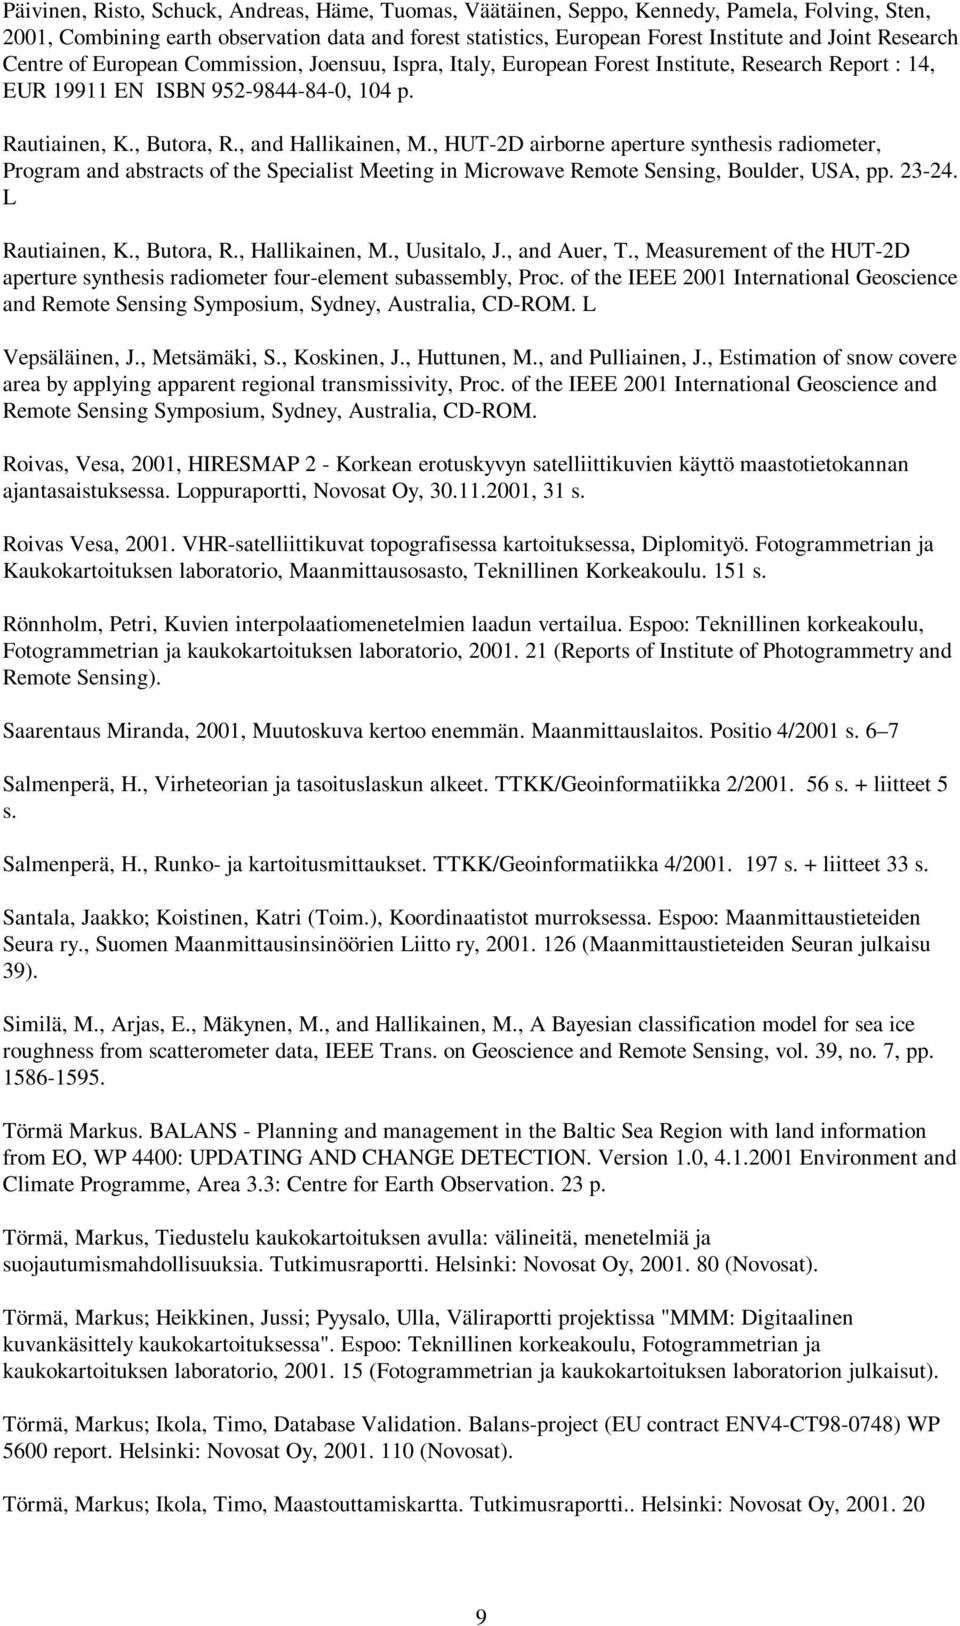 , HUT-2D airborne aperture synthesis radiometer, Program and abstracts of the Specialist Meeting in Microwave Remote Sensing, Boulder, USA, pp. 23-24. L Rautiainen, K., Butora, R., Hallikainen, M.